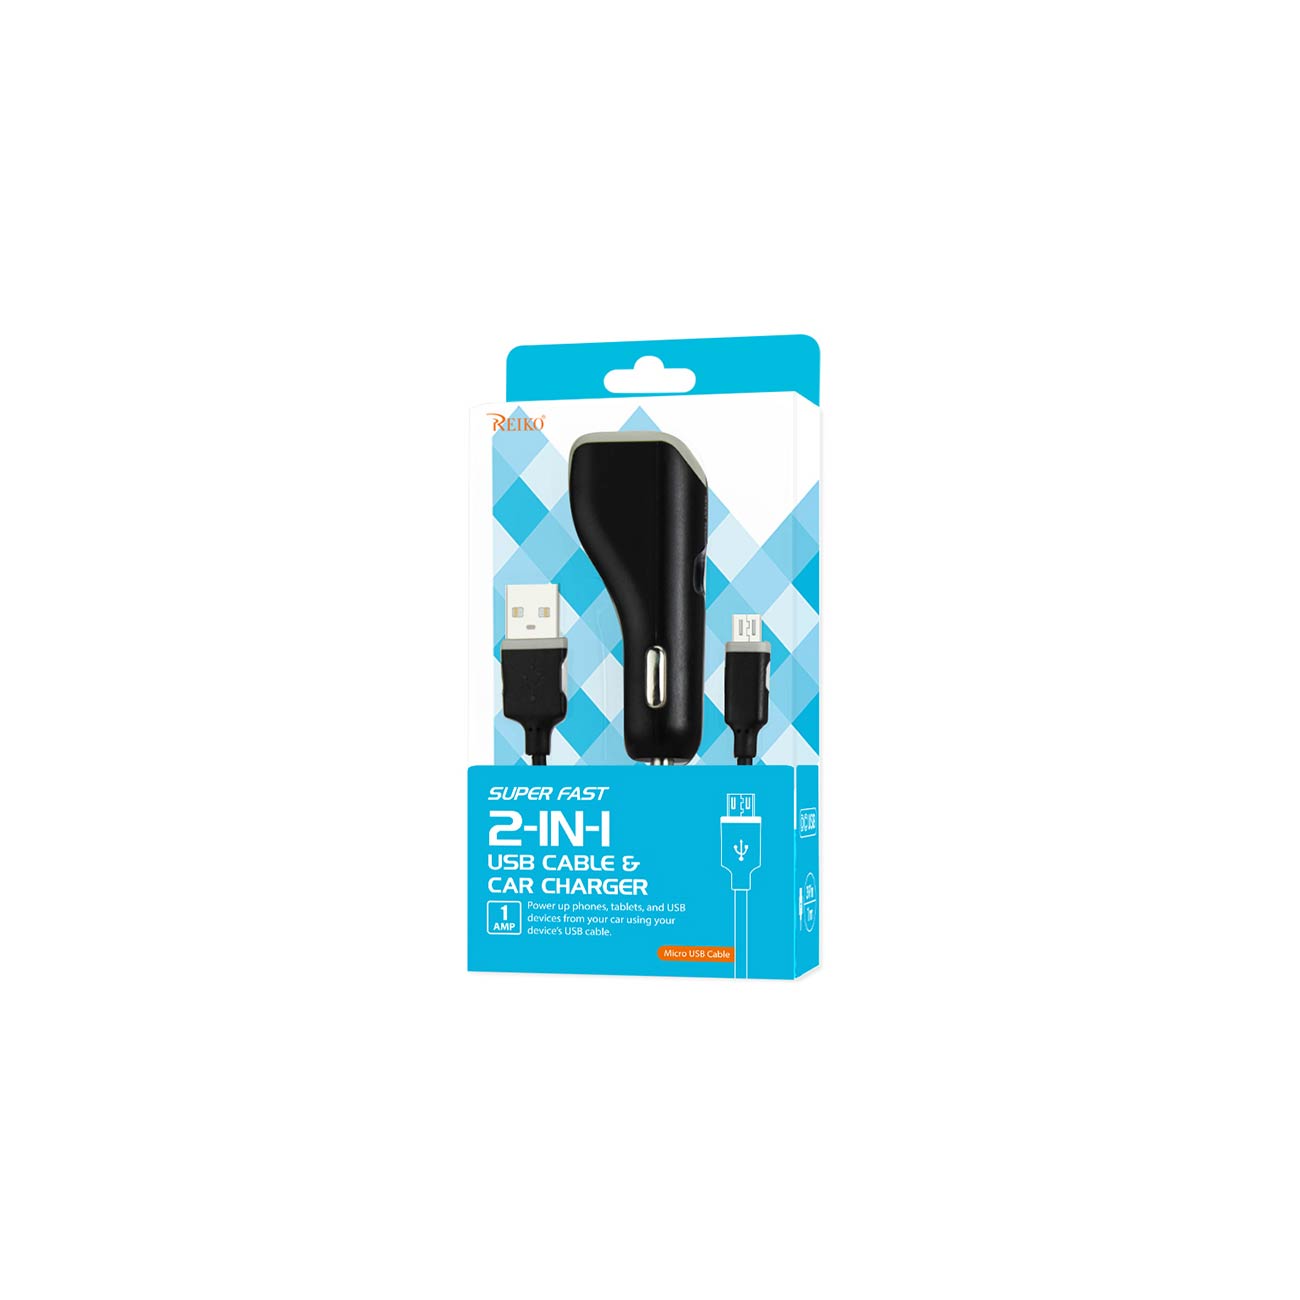 Car Charger Micro USB With USB Data Cable Black Color